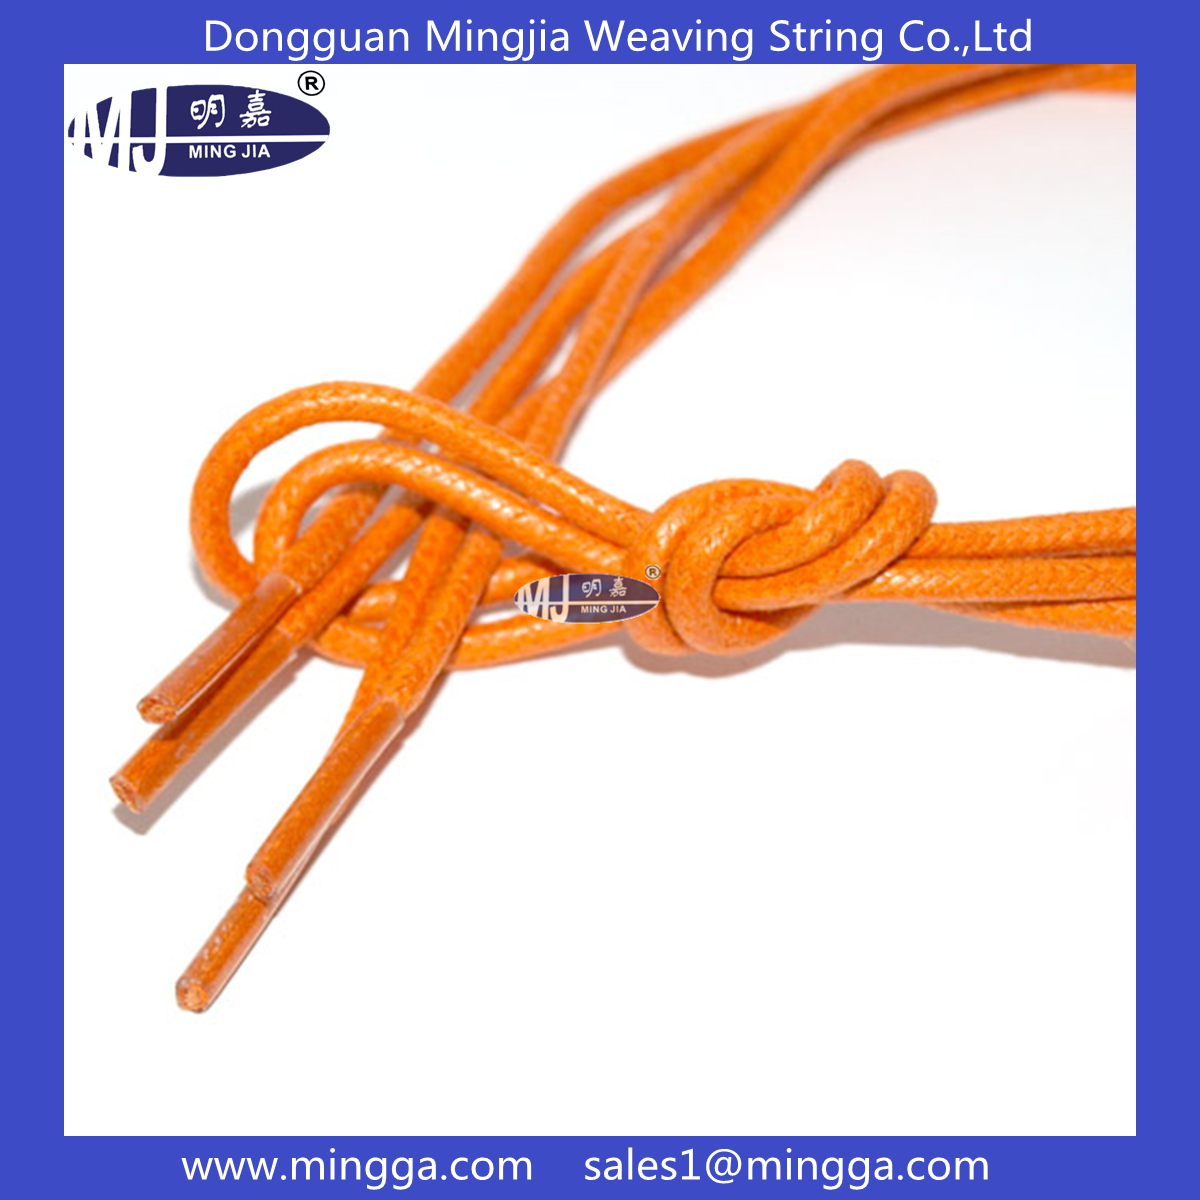 MJ-S053 round cotton waxed shoelace